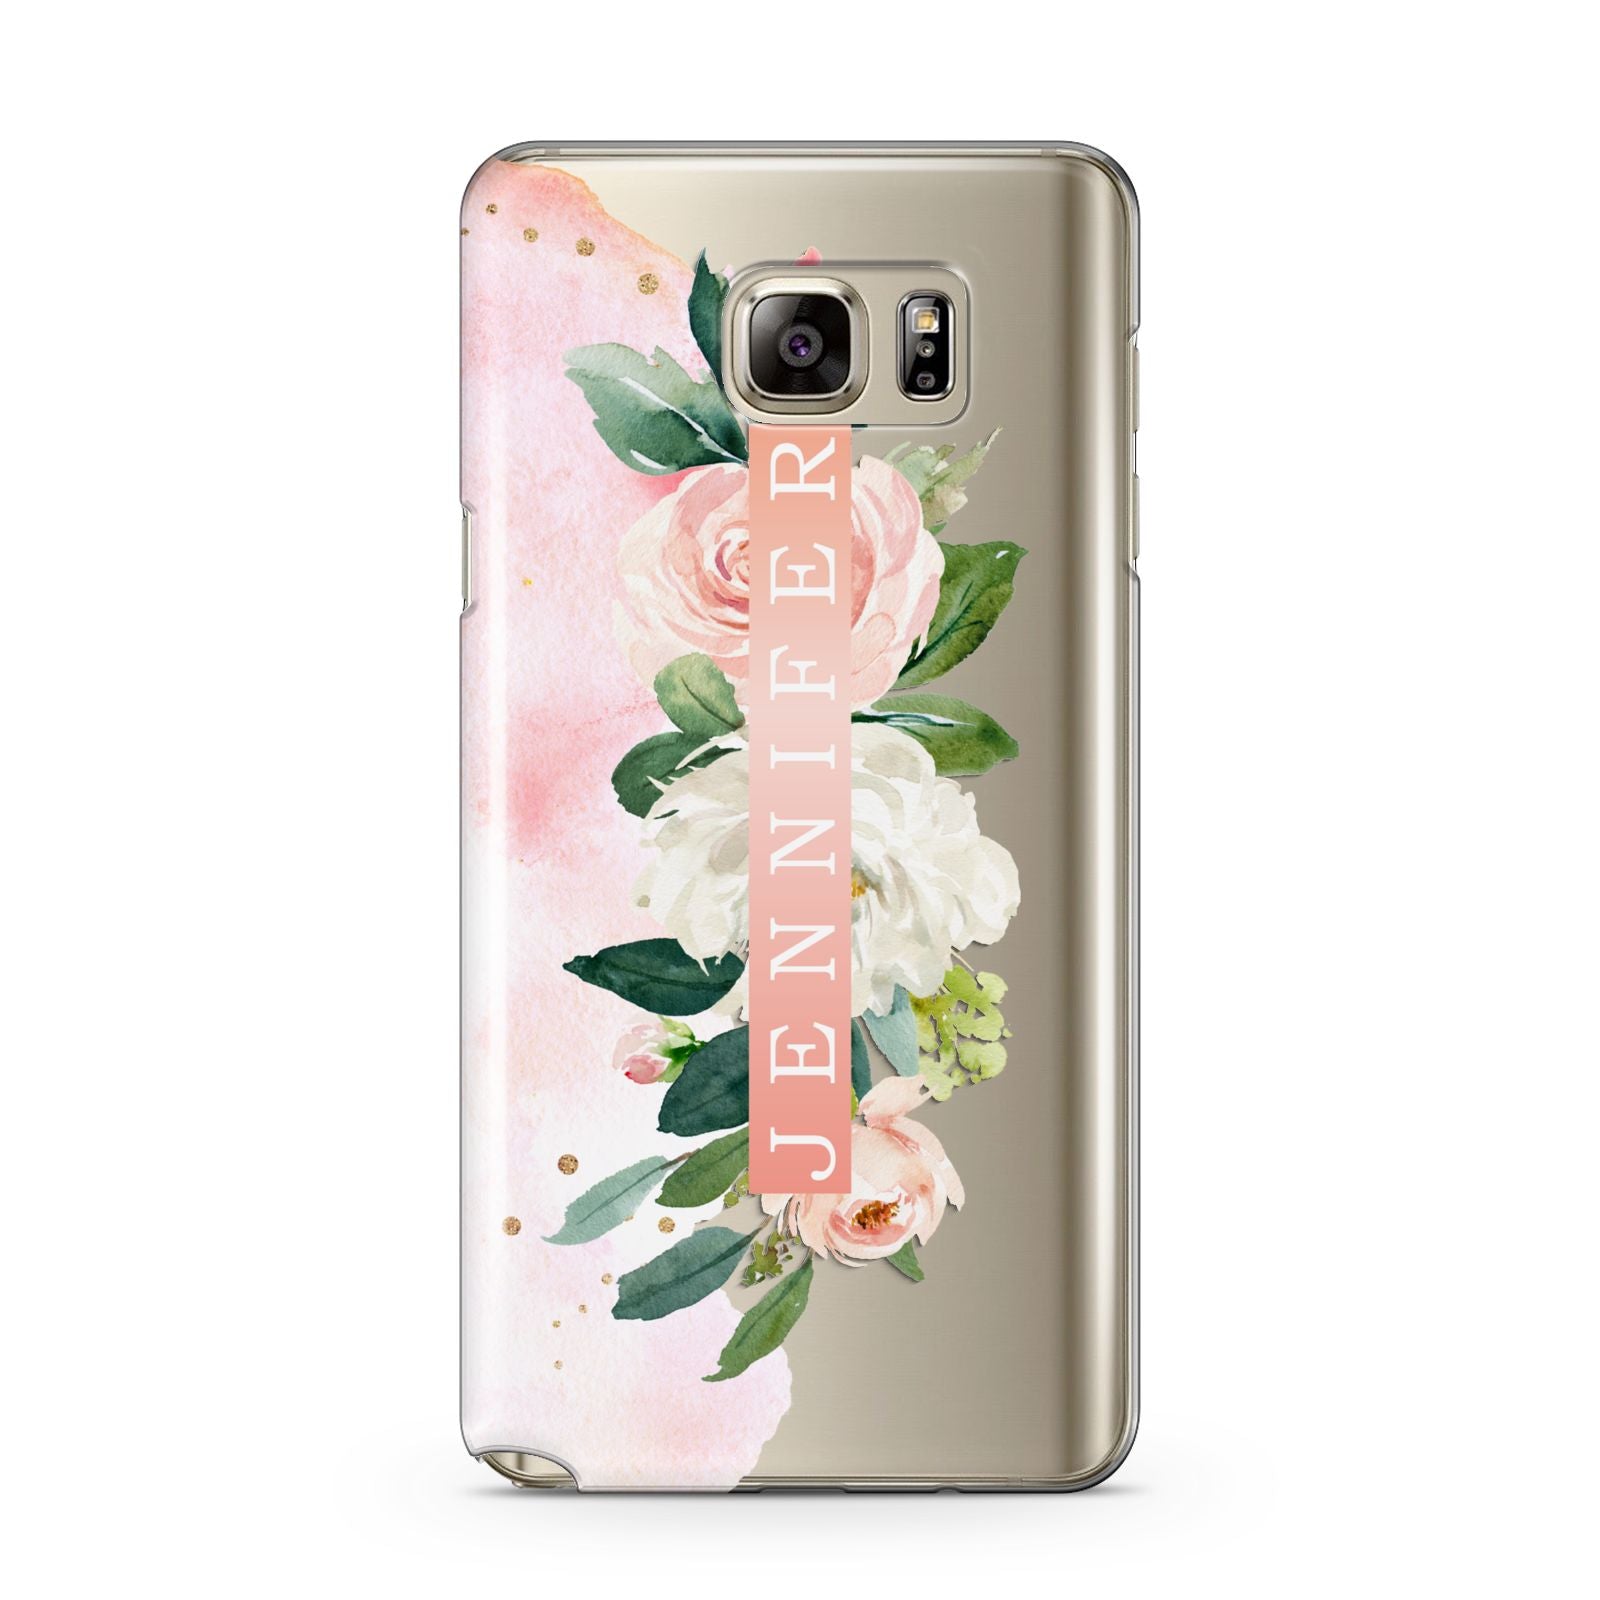 Blush Pink Personalised Name Floral Samsung Galaxy Note 5 Case